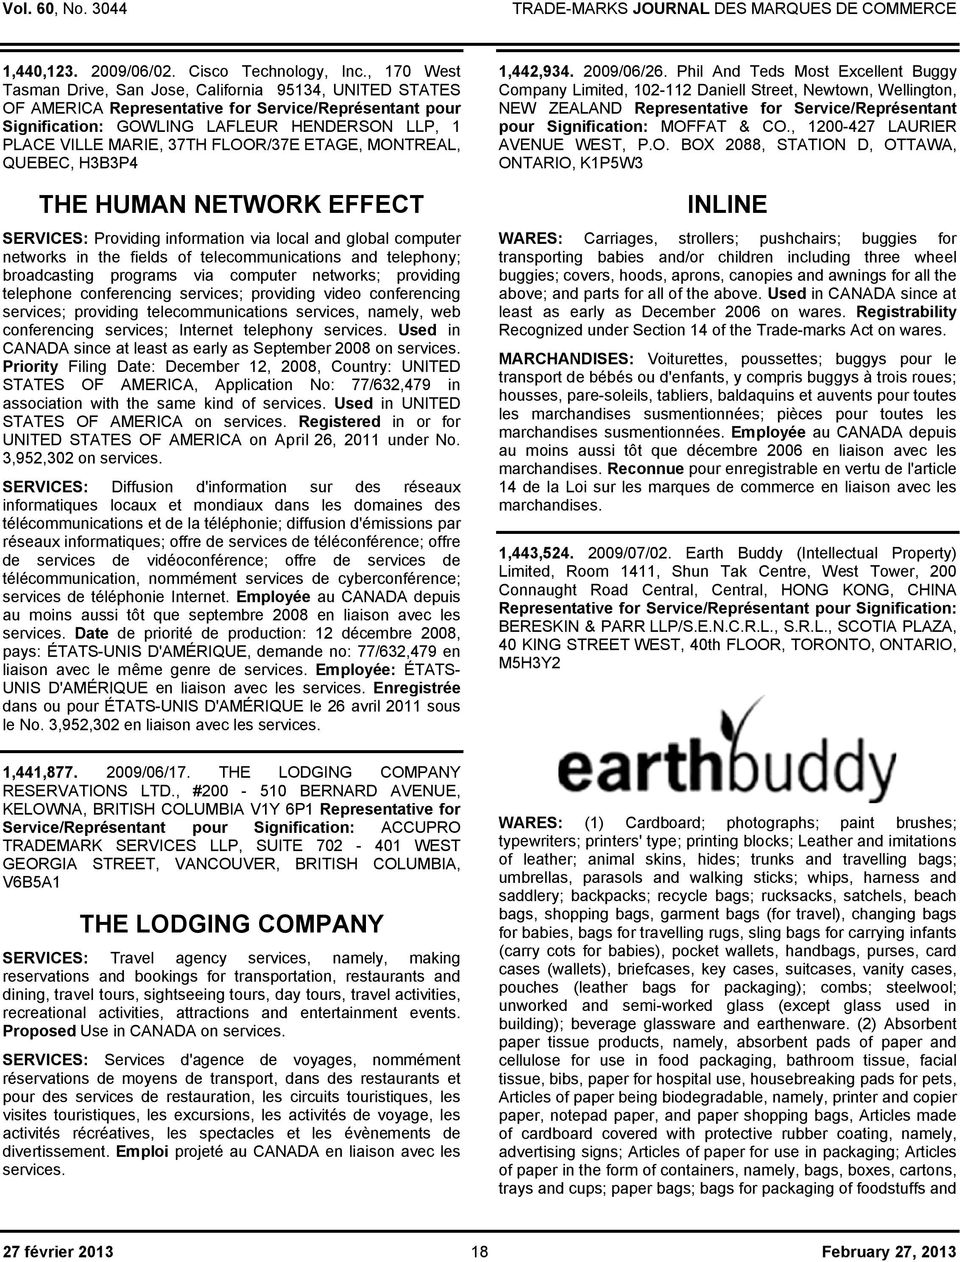 FLOOR/37E ETAGE, MONTREAL, QUEBEC, H3B3P4 THE HUMAN NETWORK EFFECT SERVICES: Providing information via local and global computer networks in the fields of telecommunications and telephony;